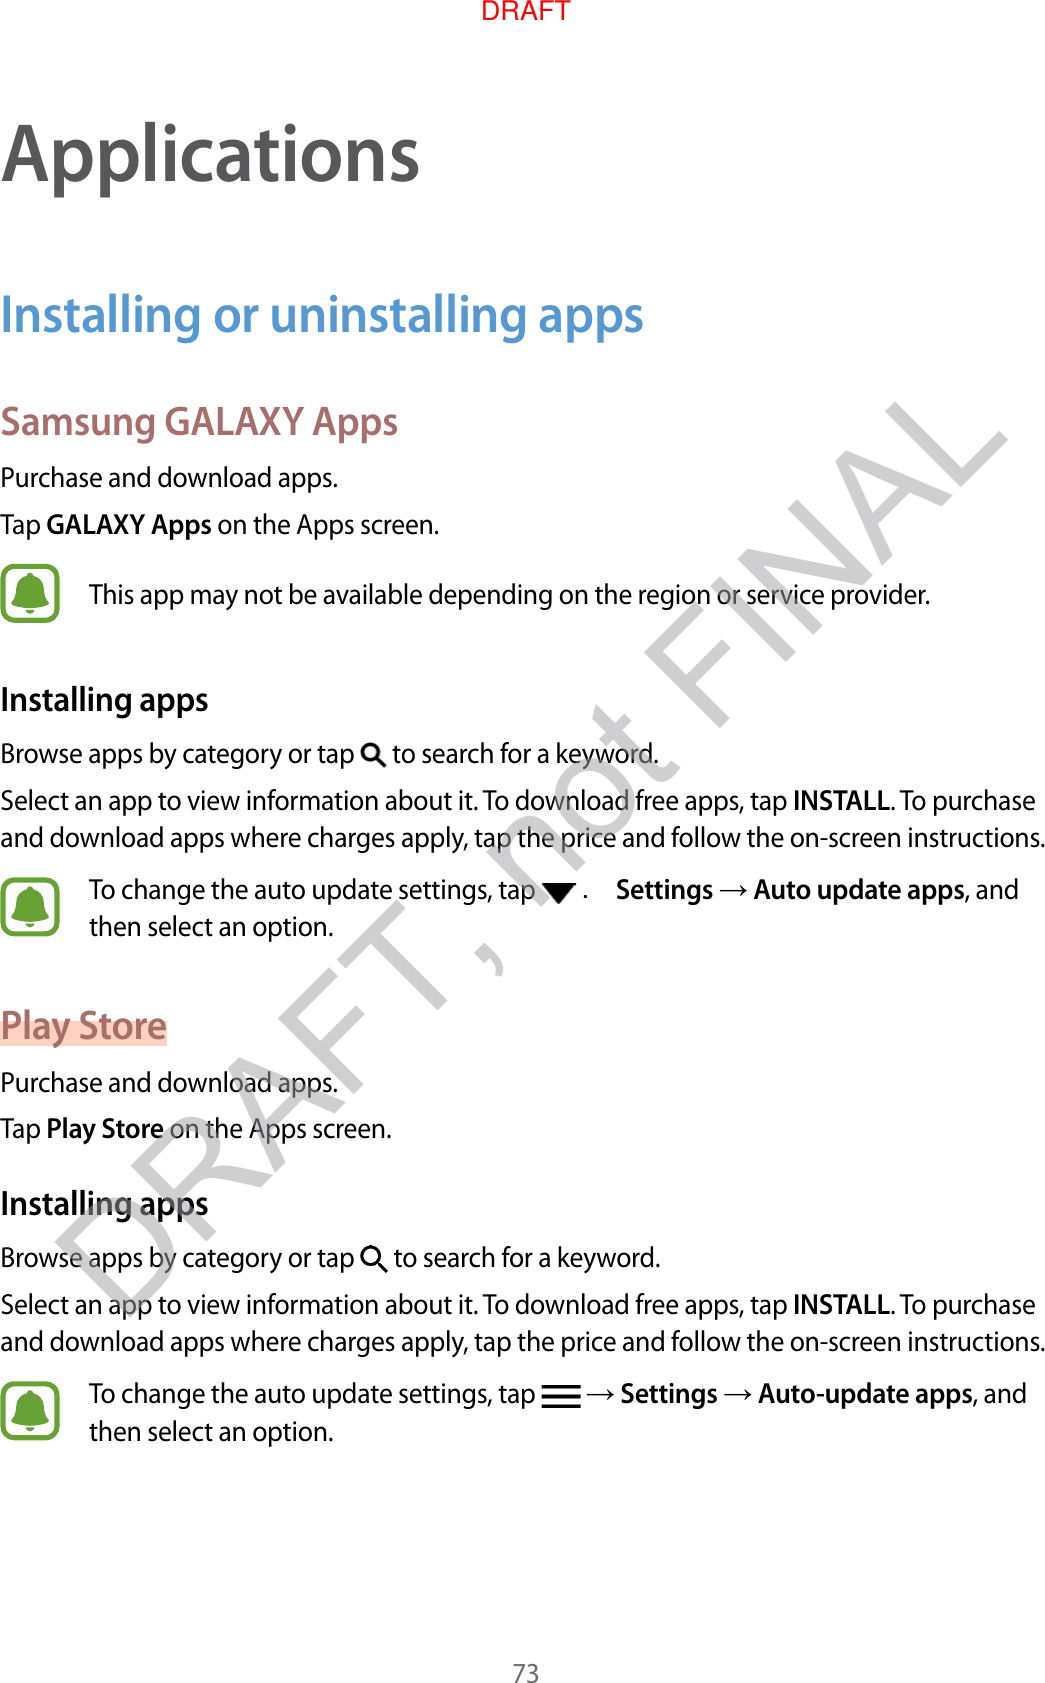 73ApplicationsInstalling or uninstalling appsSamsung GALAXY AppsPur chase and do wnload apps .Tap GALAXY Apps on the Apps screen.This app may not be a vailable depending on the r eg ion or service provider.Installing appsBrow se apps b y cat egory or tap   to search for a keywor d .Select an app to view inf ormation about it. To download free apps, tap INSTALL. To purchase and download apps where char ges apply, tap the price and f ollo w the on-scr een instructions.To change the auto update settings , tap   . Settings  Aut o updat e apps, and then select an option.Pla y St orePur chase and do wnload apps .Tap Play St or e on the Apps screen.Installing appsBrow se apps b y cat egory or tap   to search for a keywor d .Select an app to view inf ormation about it. To download free apps, tap INSTALL. To purchase and download apps where char ges apply, tap the price and f ollo w the on-scr een instructions.To change the auto update settings , tap    Settings  Aut o-update apps, and then select an option.DRAFT, not FINALDRAFT